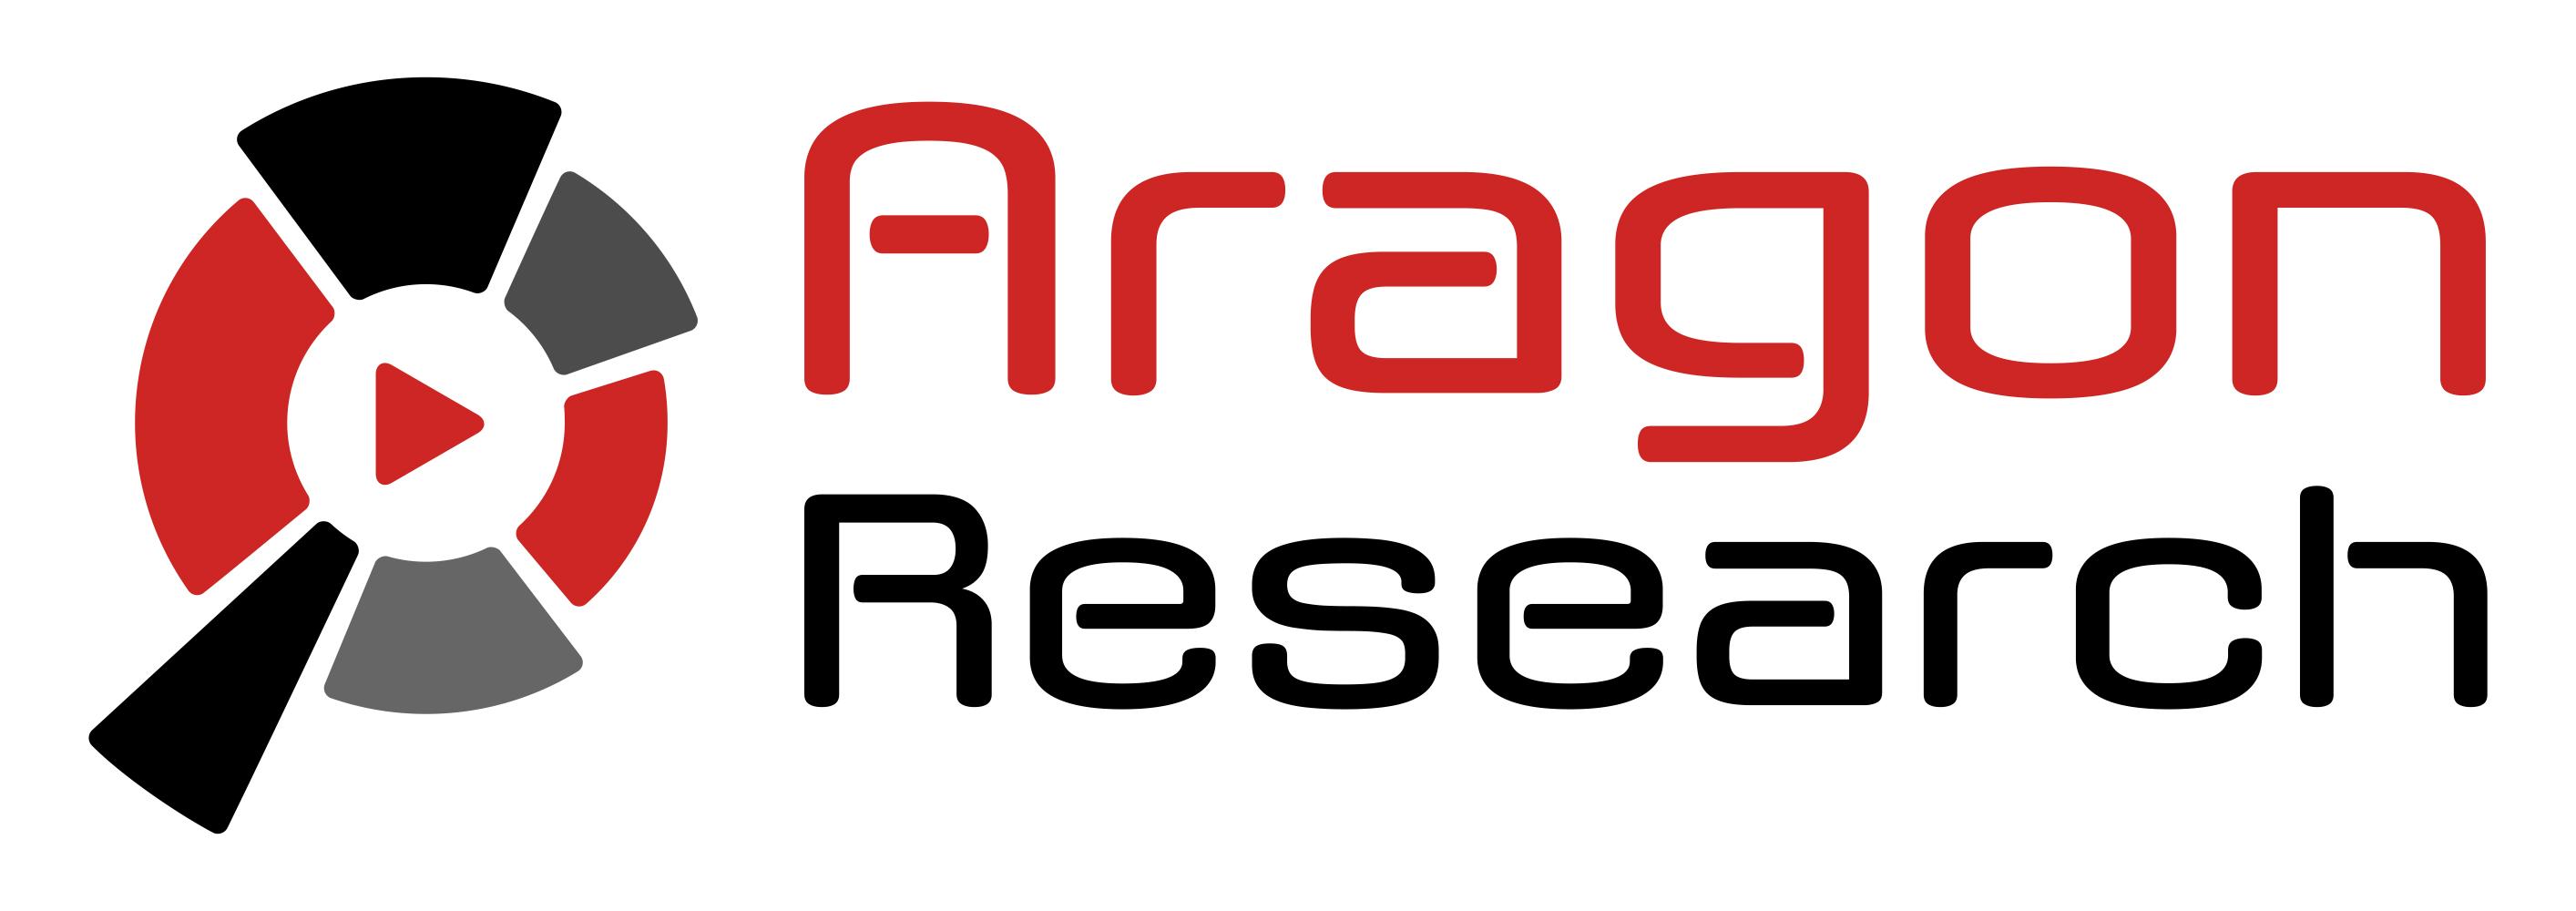 Red Hands-On Globe Logo - Next Generation Technology Research from Aragon Research